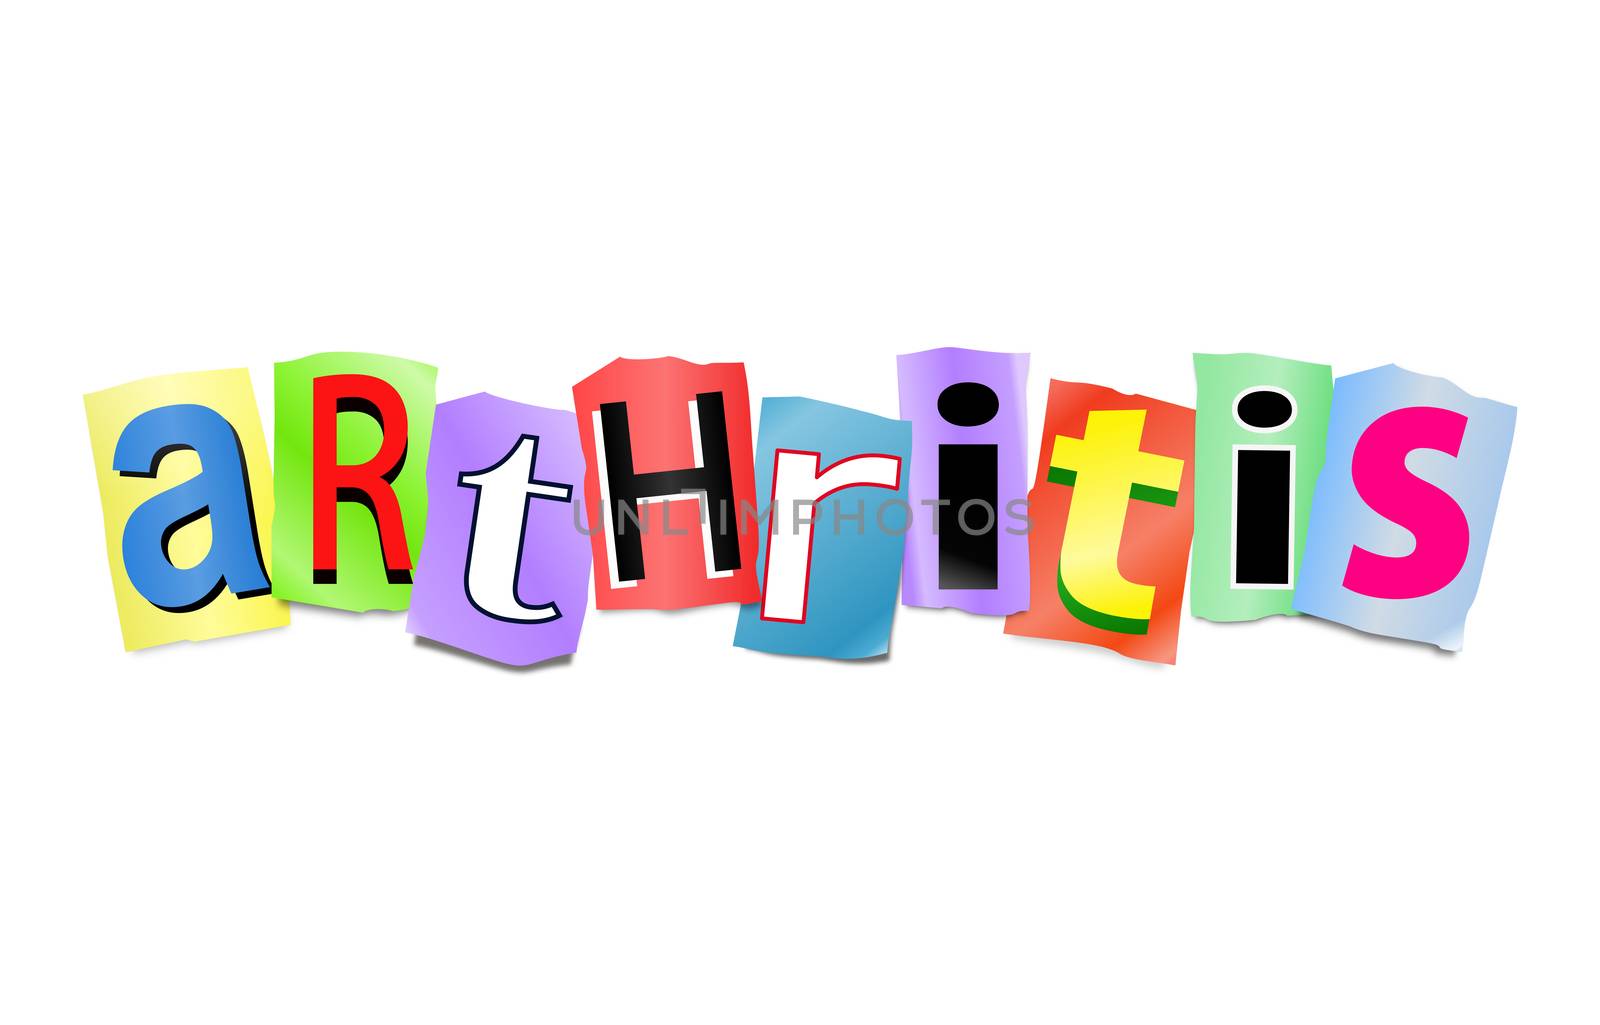 Illustration depicting a set of cut out printed letters arranged to form the word Arthritis.